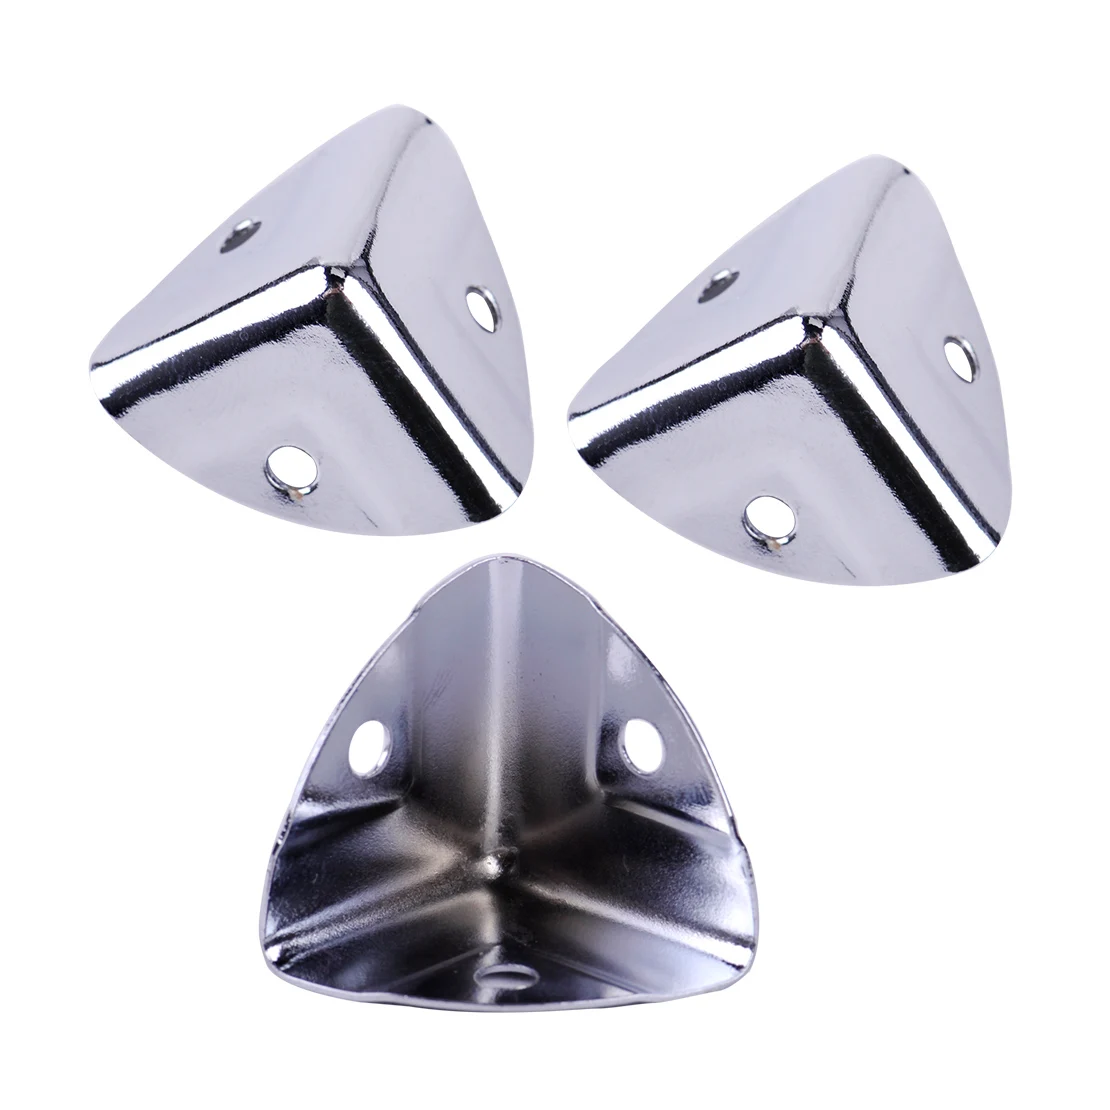 4pcs Silver Metal Corner Brackets Angle Brace Protector Trunk Box Case Ches IS 